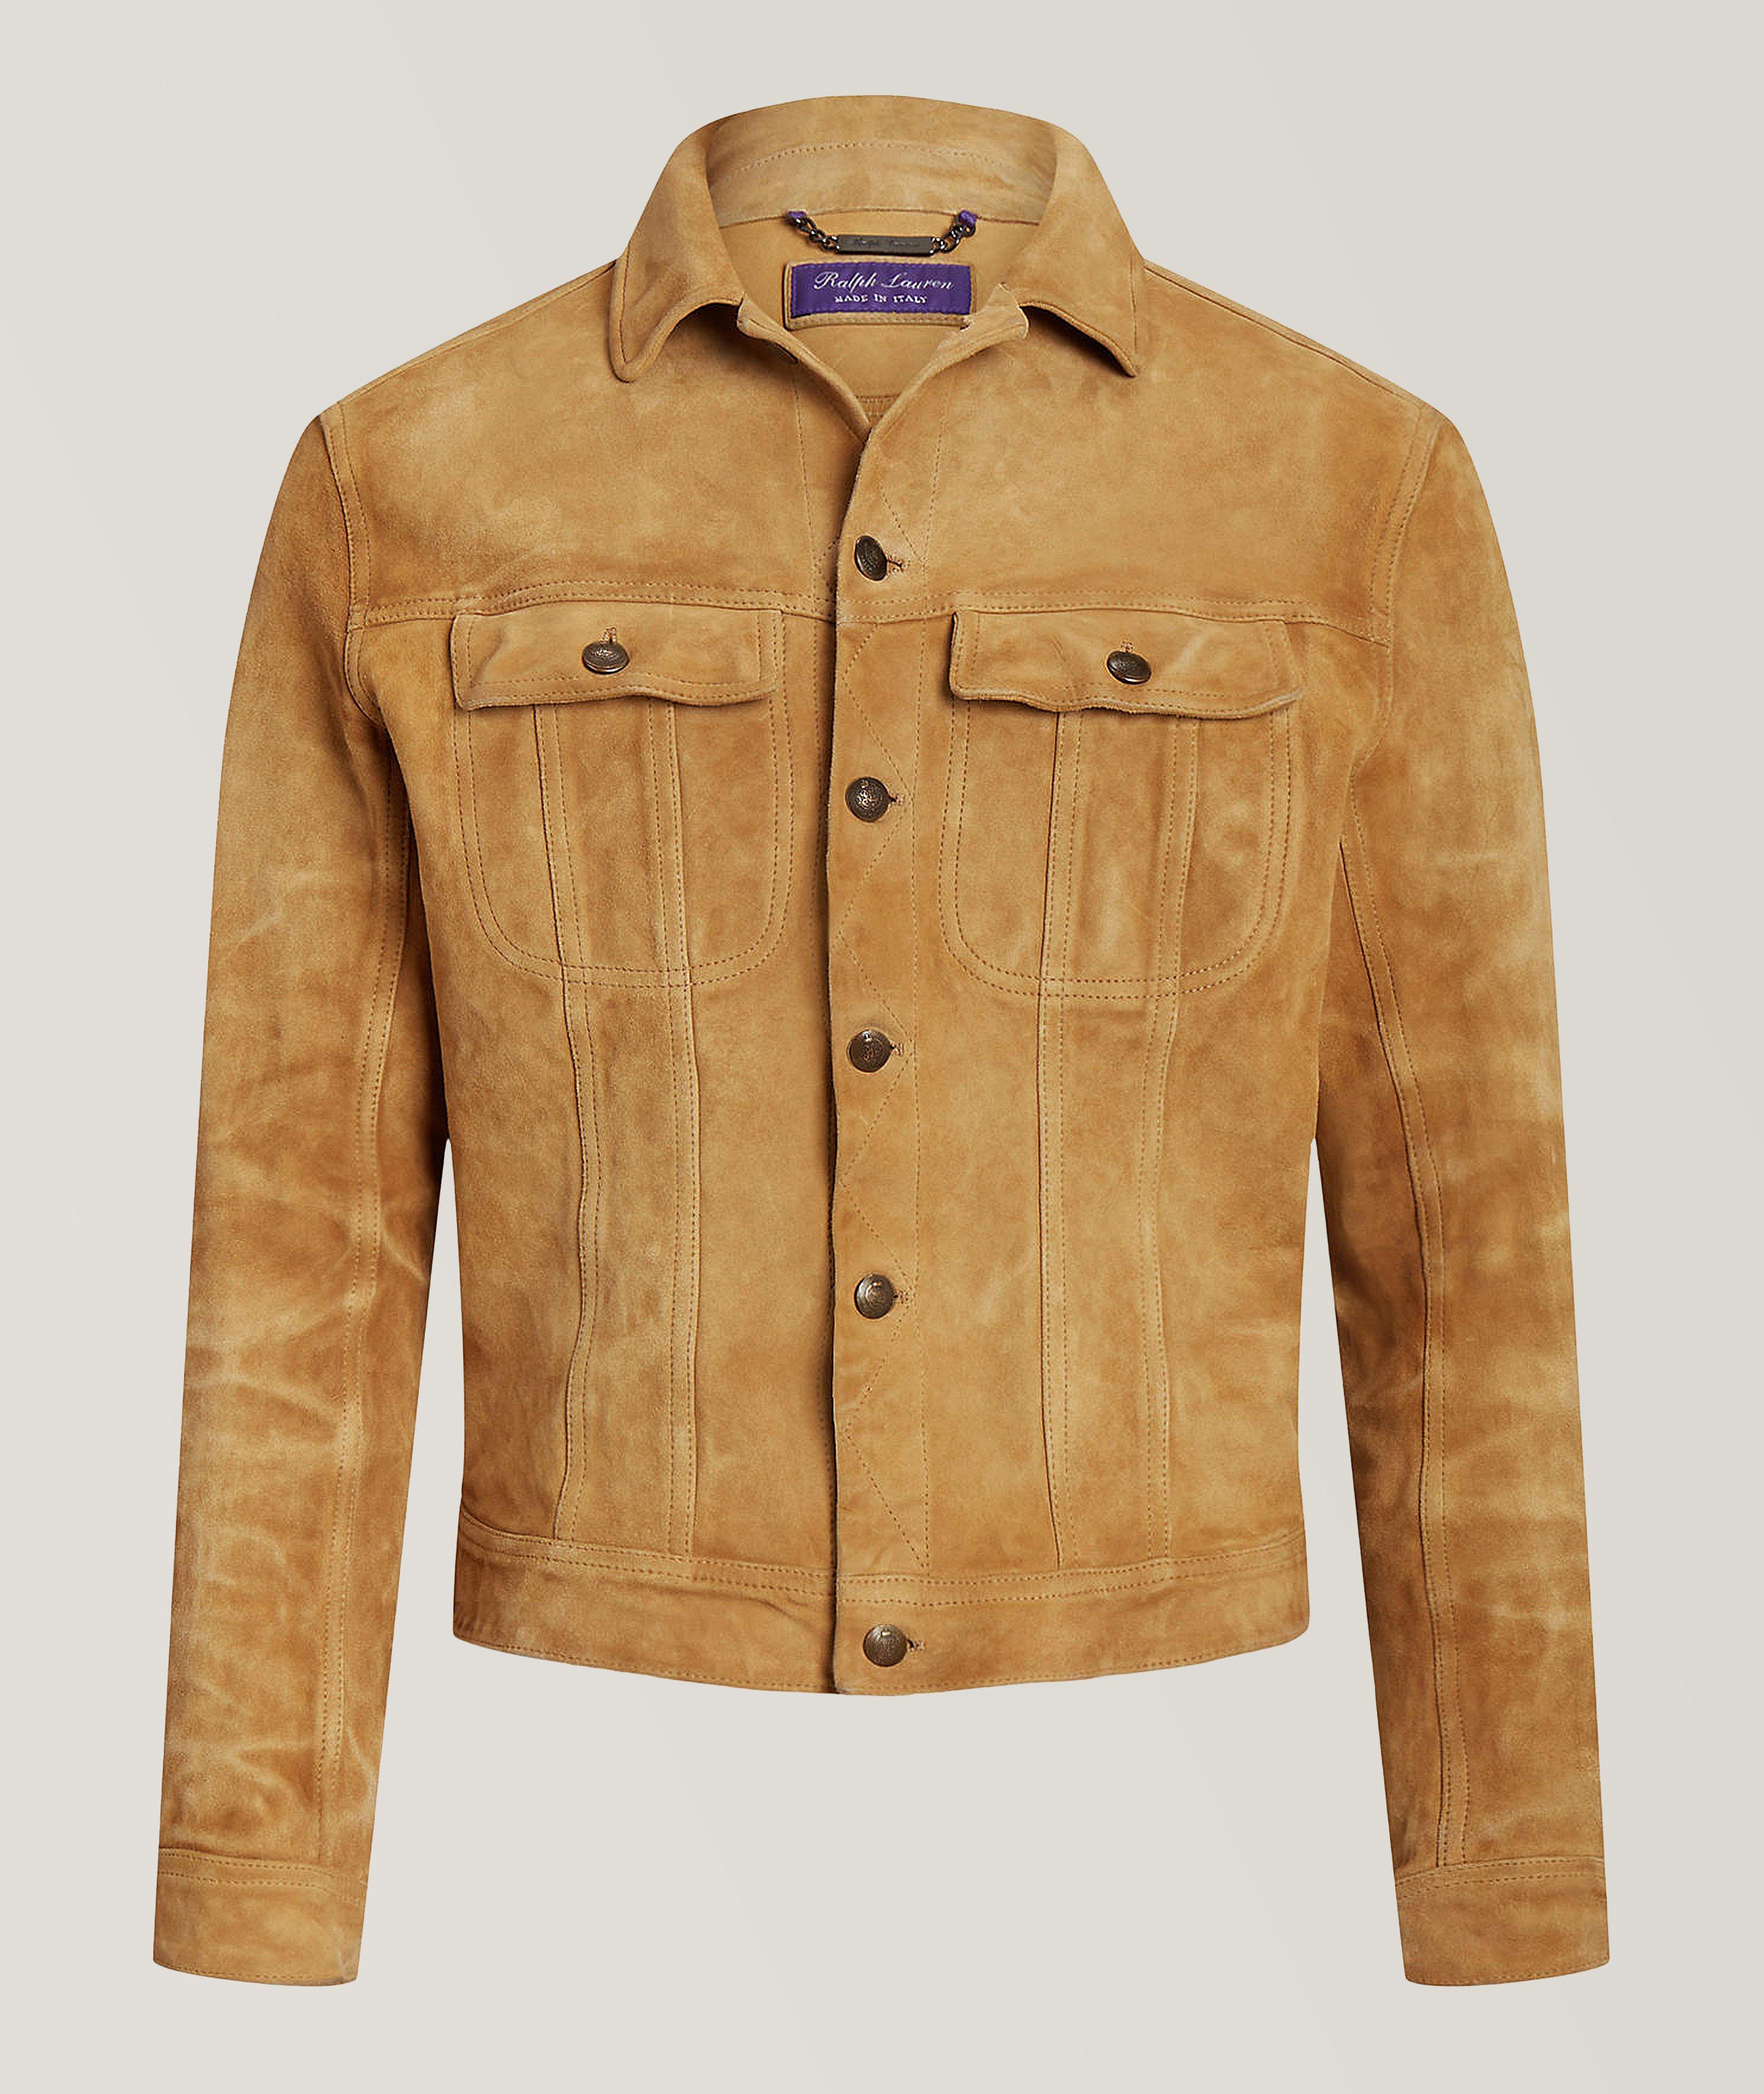 Clifton Suede Trucker Jacket image 0